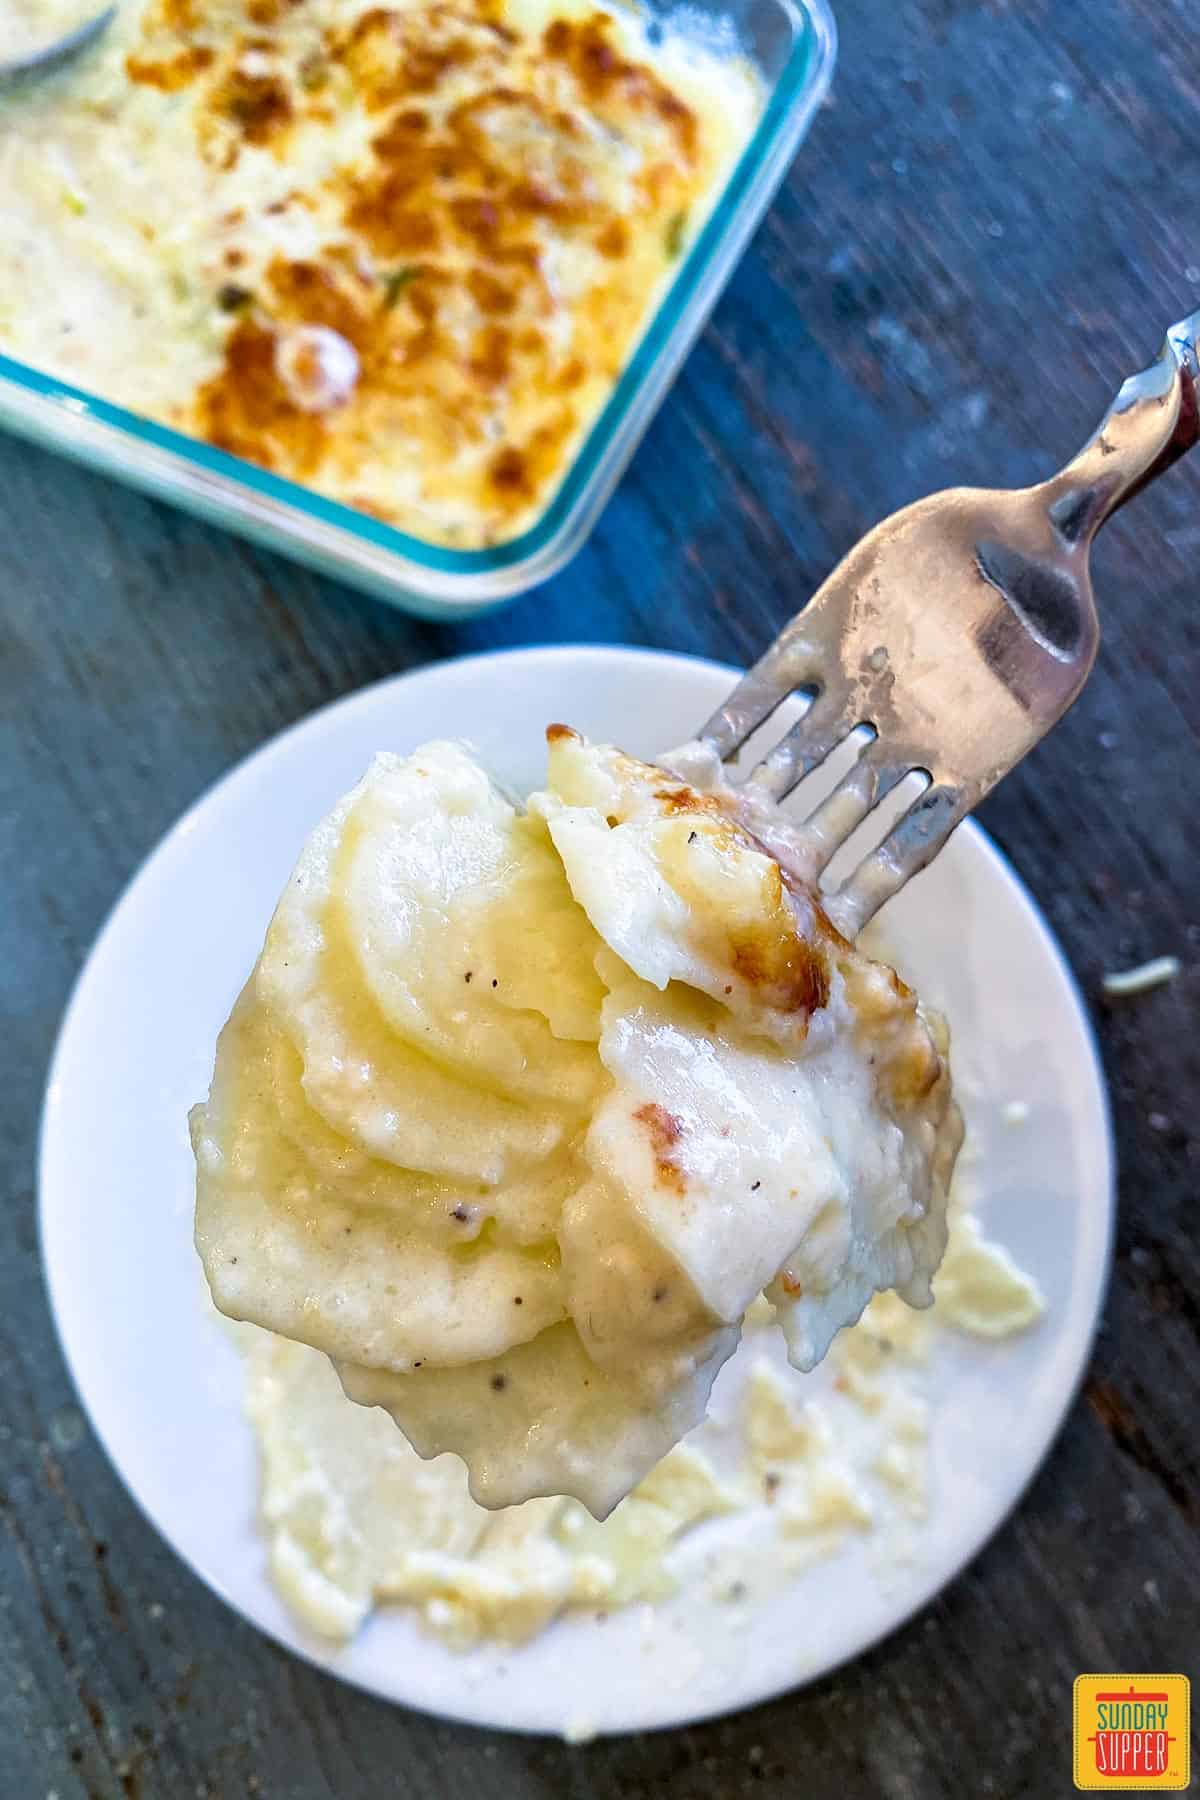 Holding a forkful of Instant Pot Scalloped Potatoes over a white plate near the casserole dish of potatoes